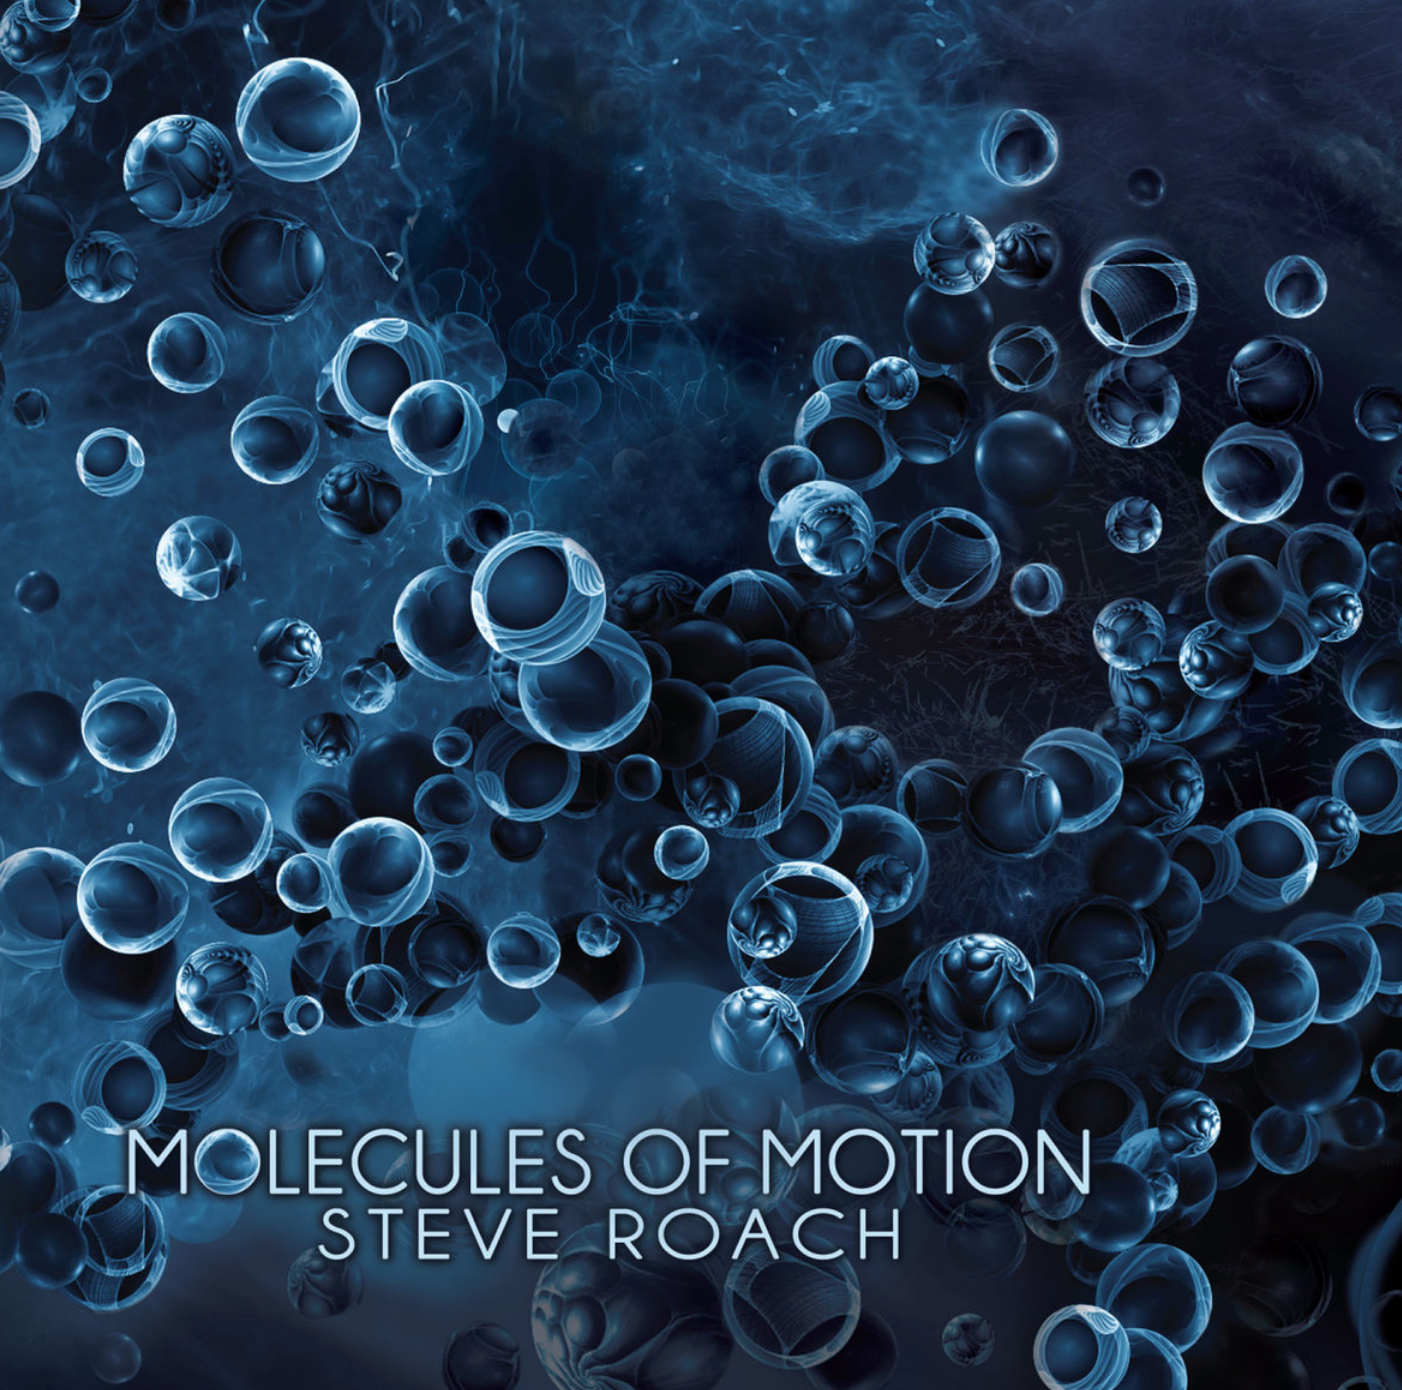 MOLECULES OF MOTION